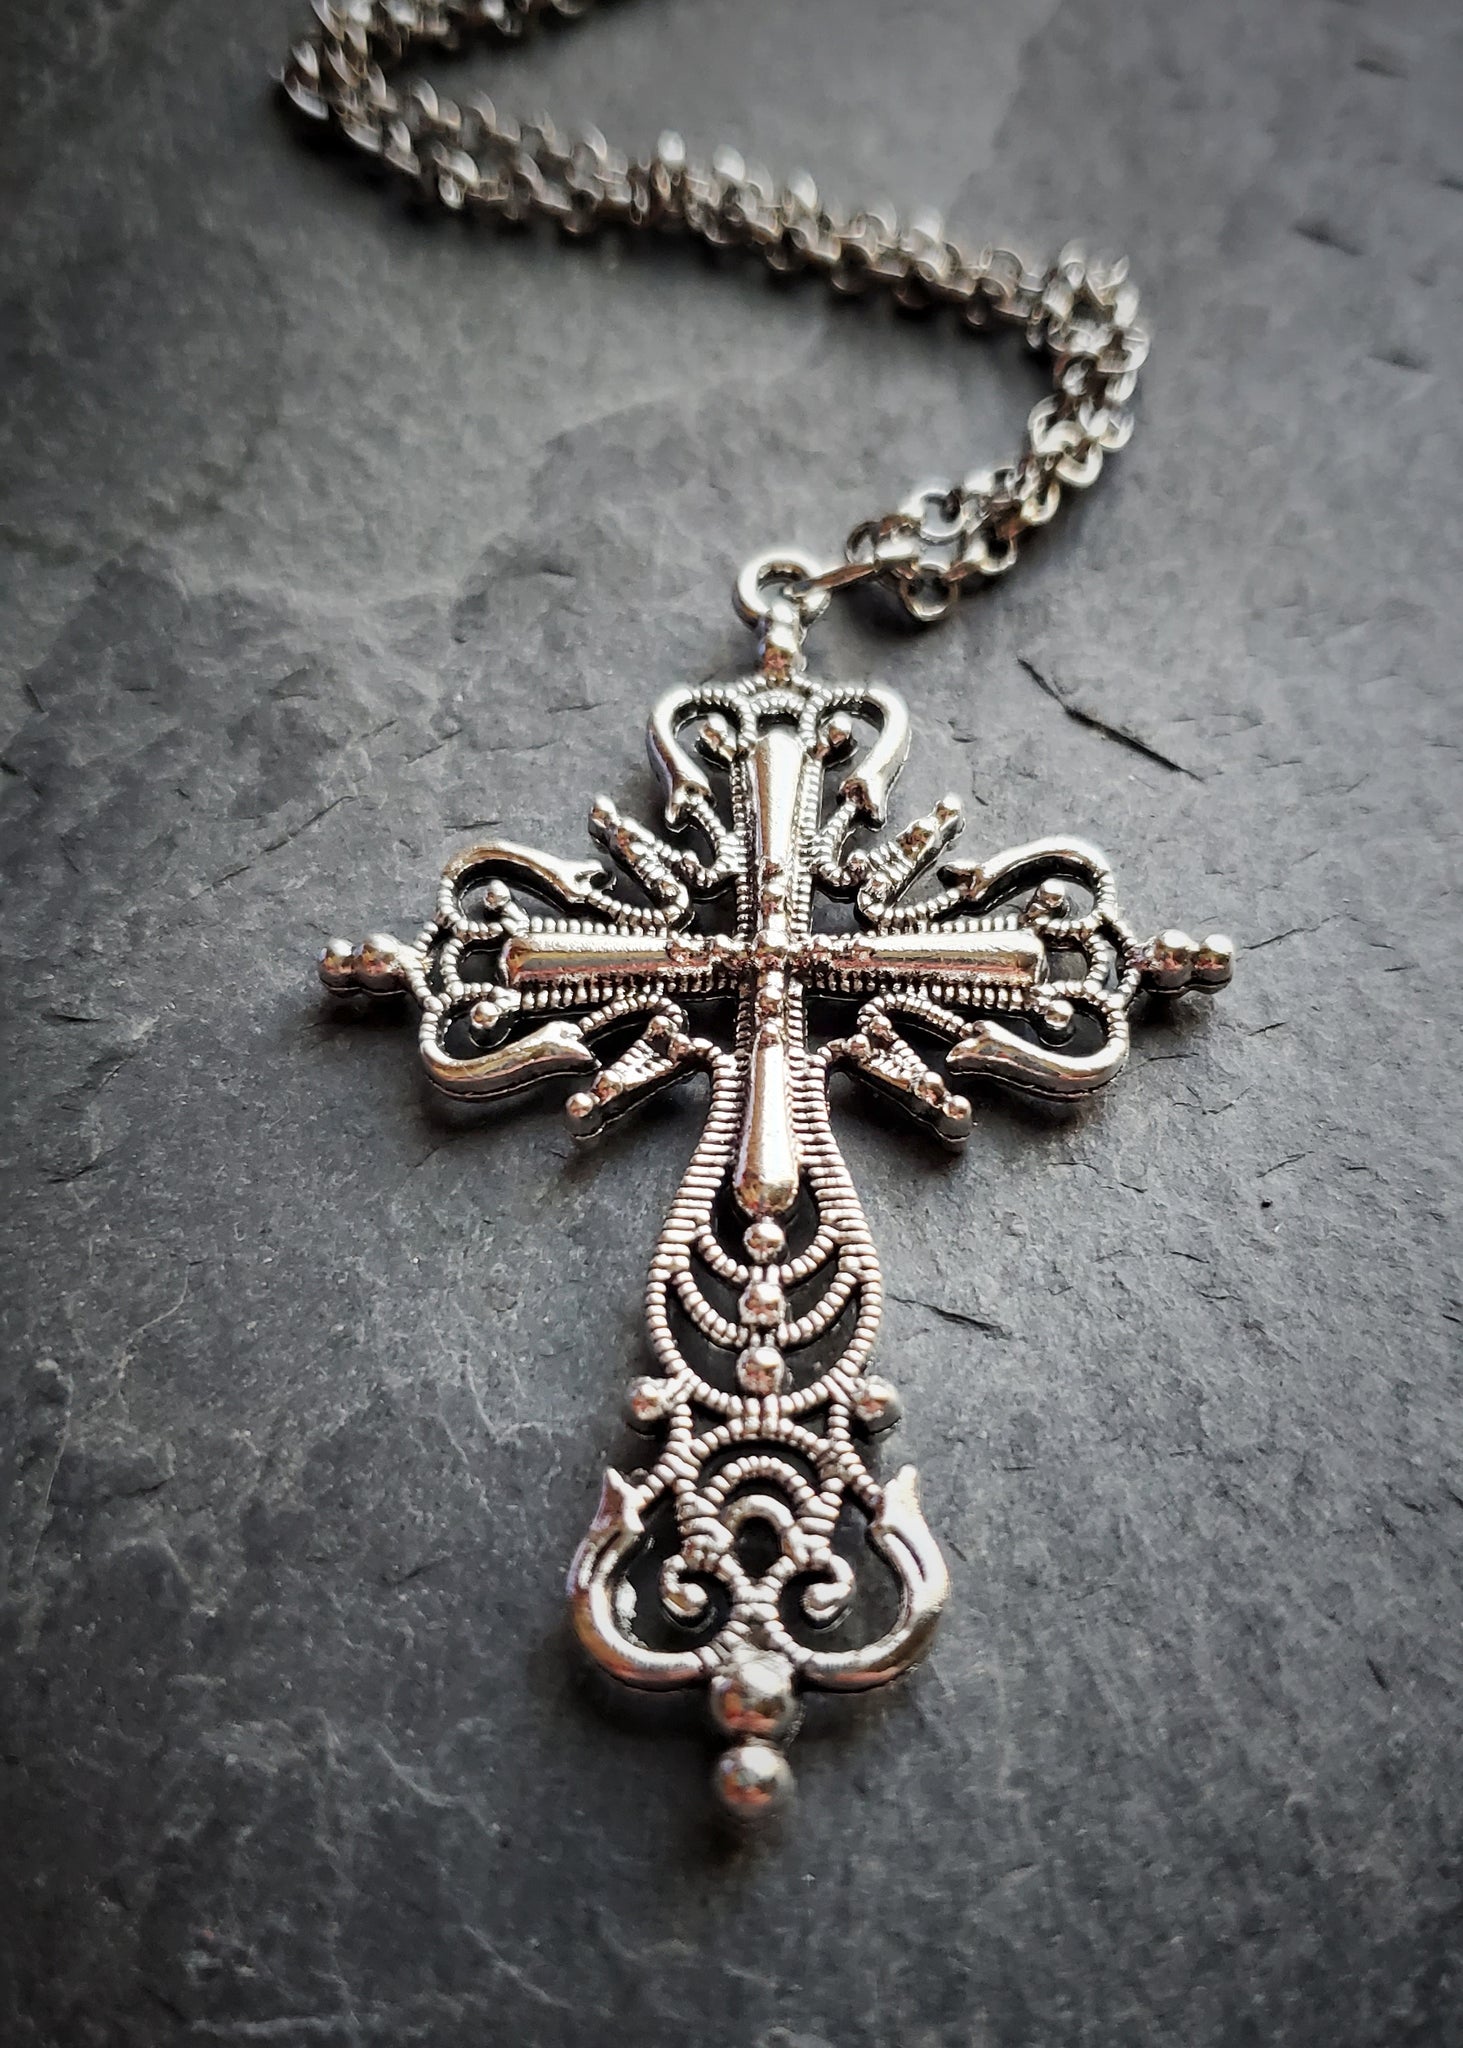 Silver Gothic Cross Necklace Fantasy Jewelry